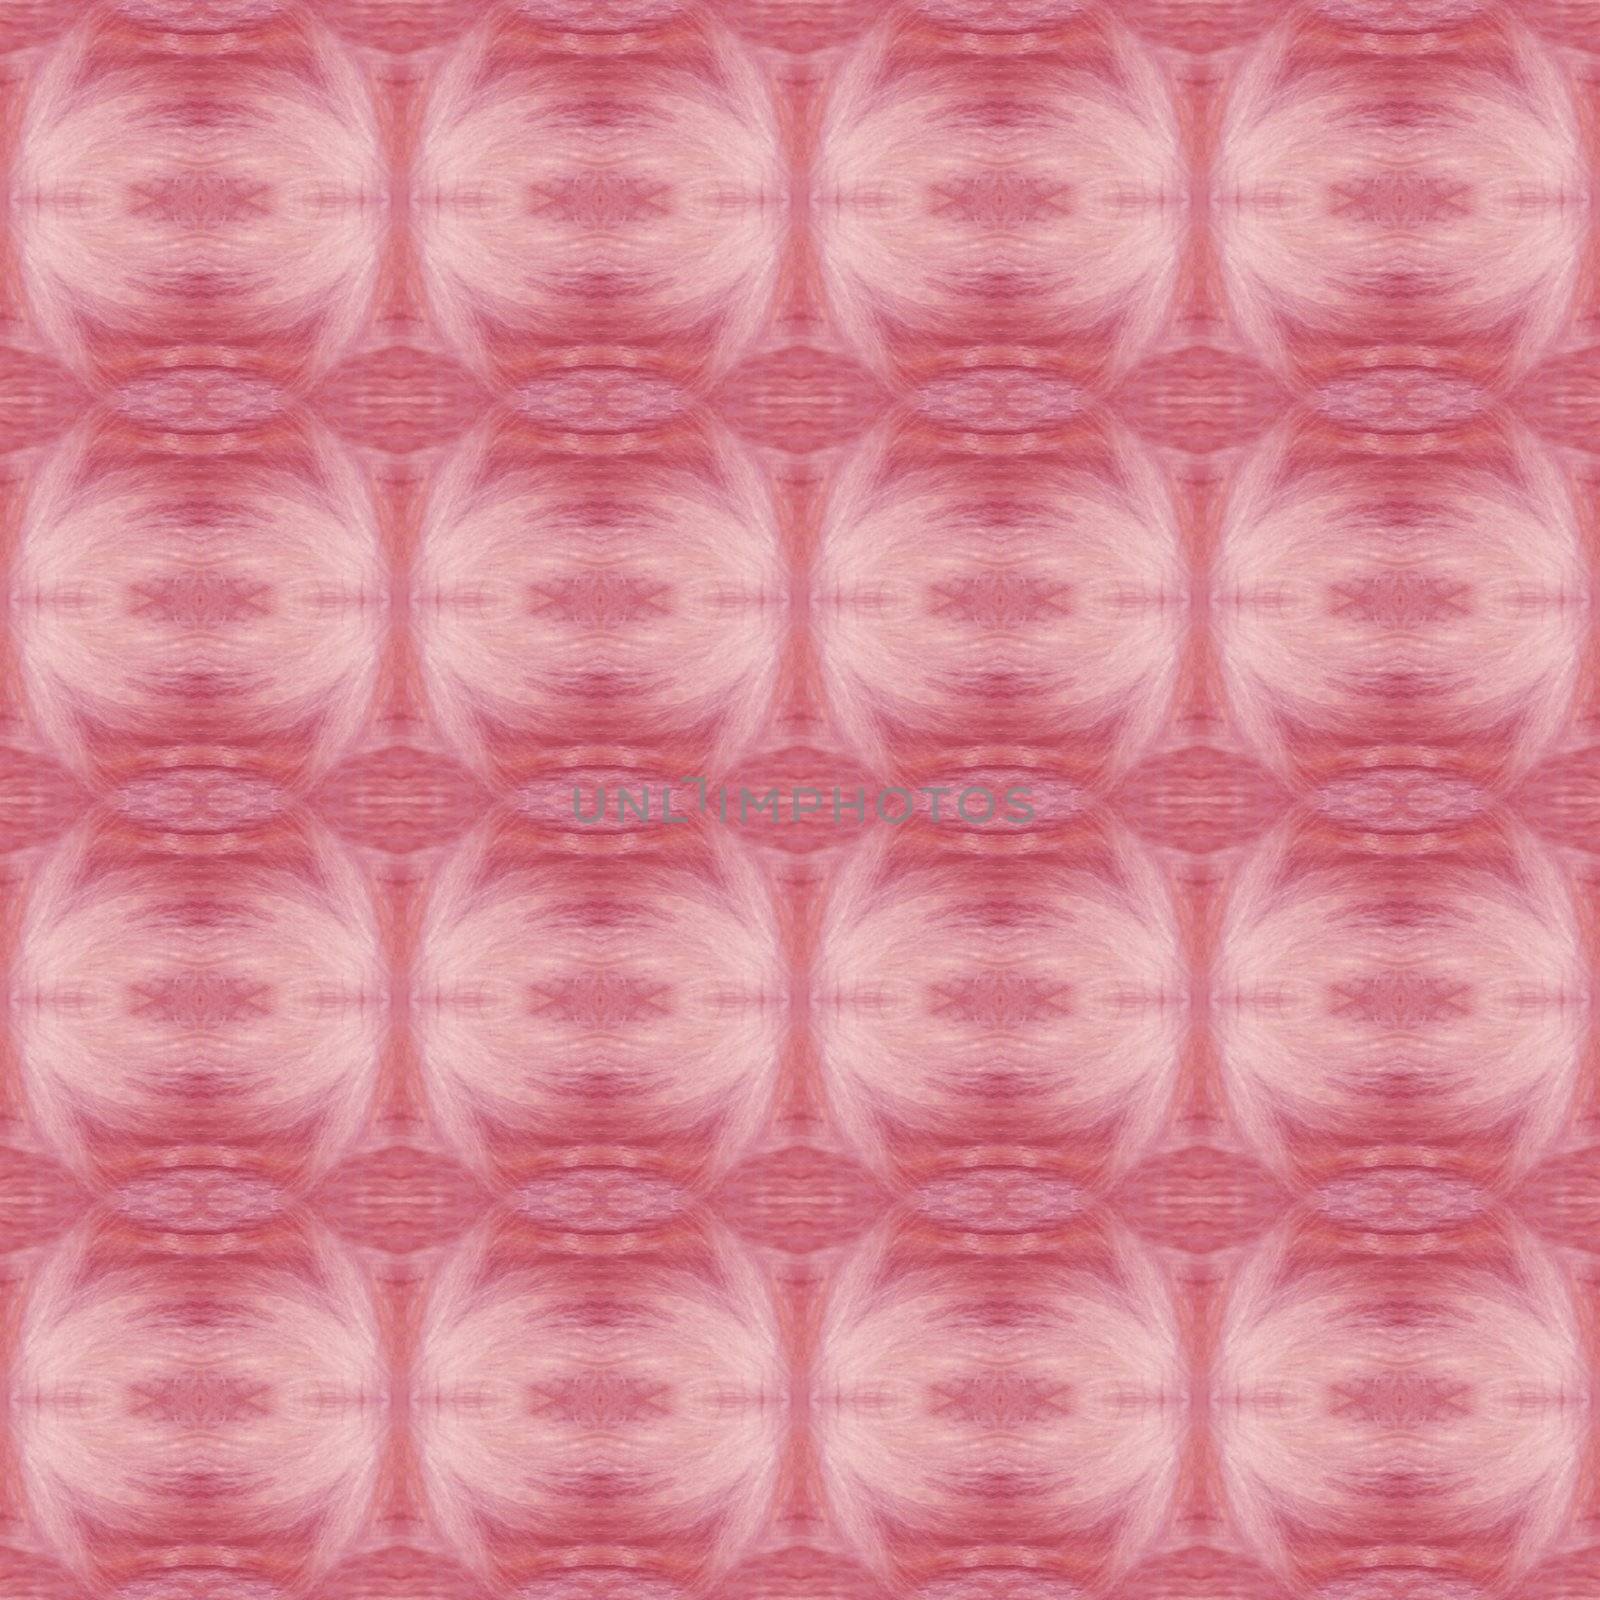 Pink Seamless Background, Tiles or Border by Nonboe